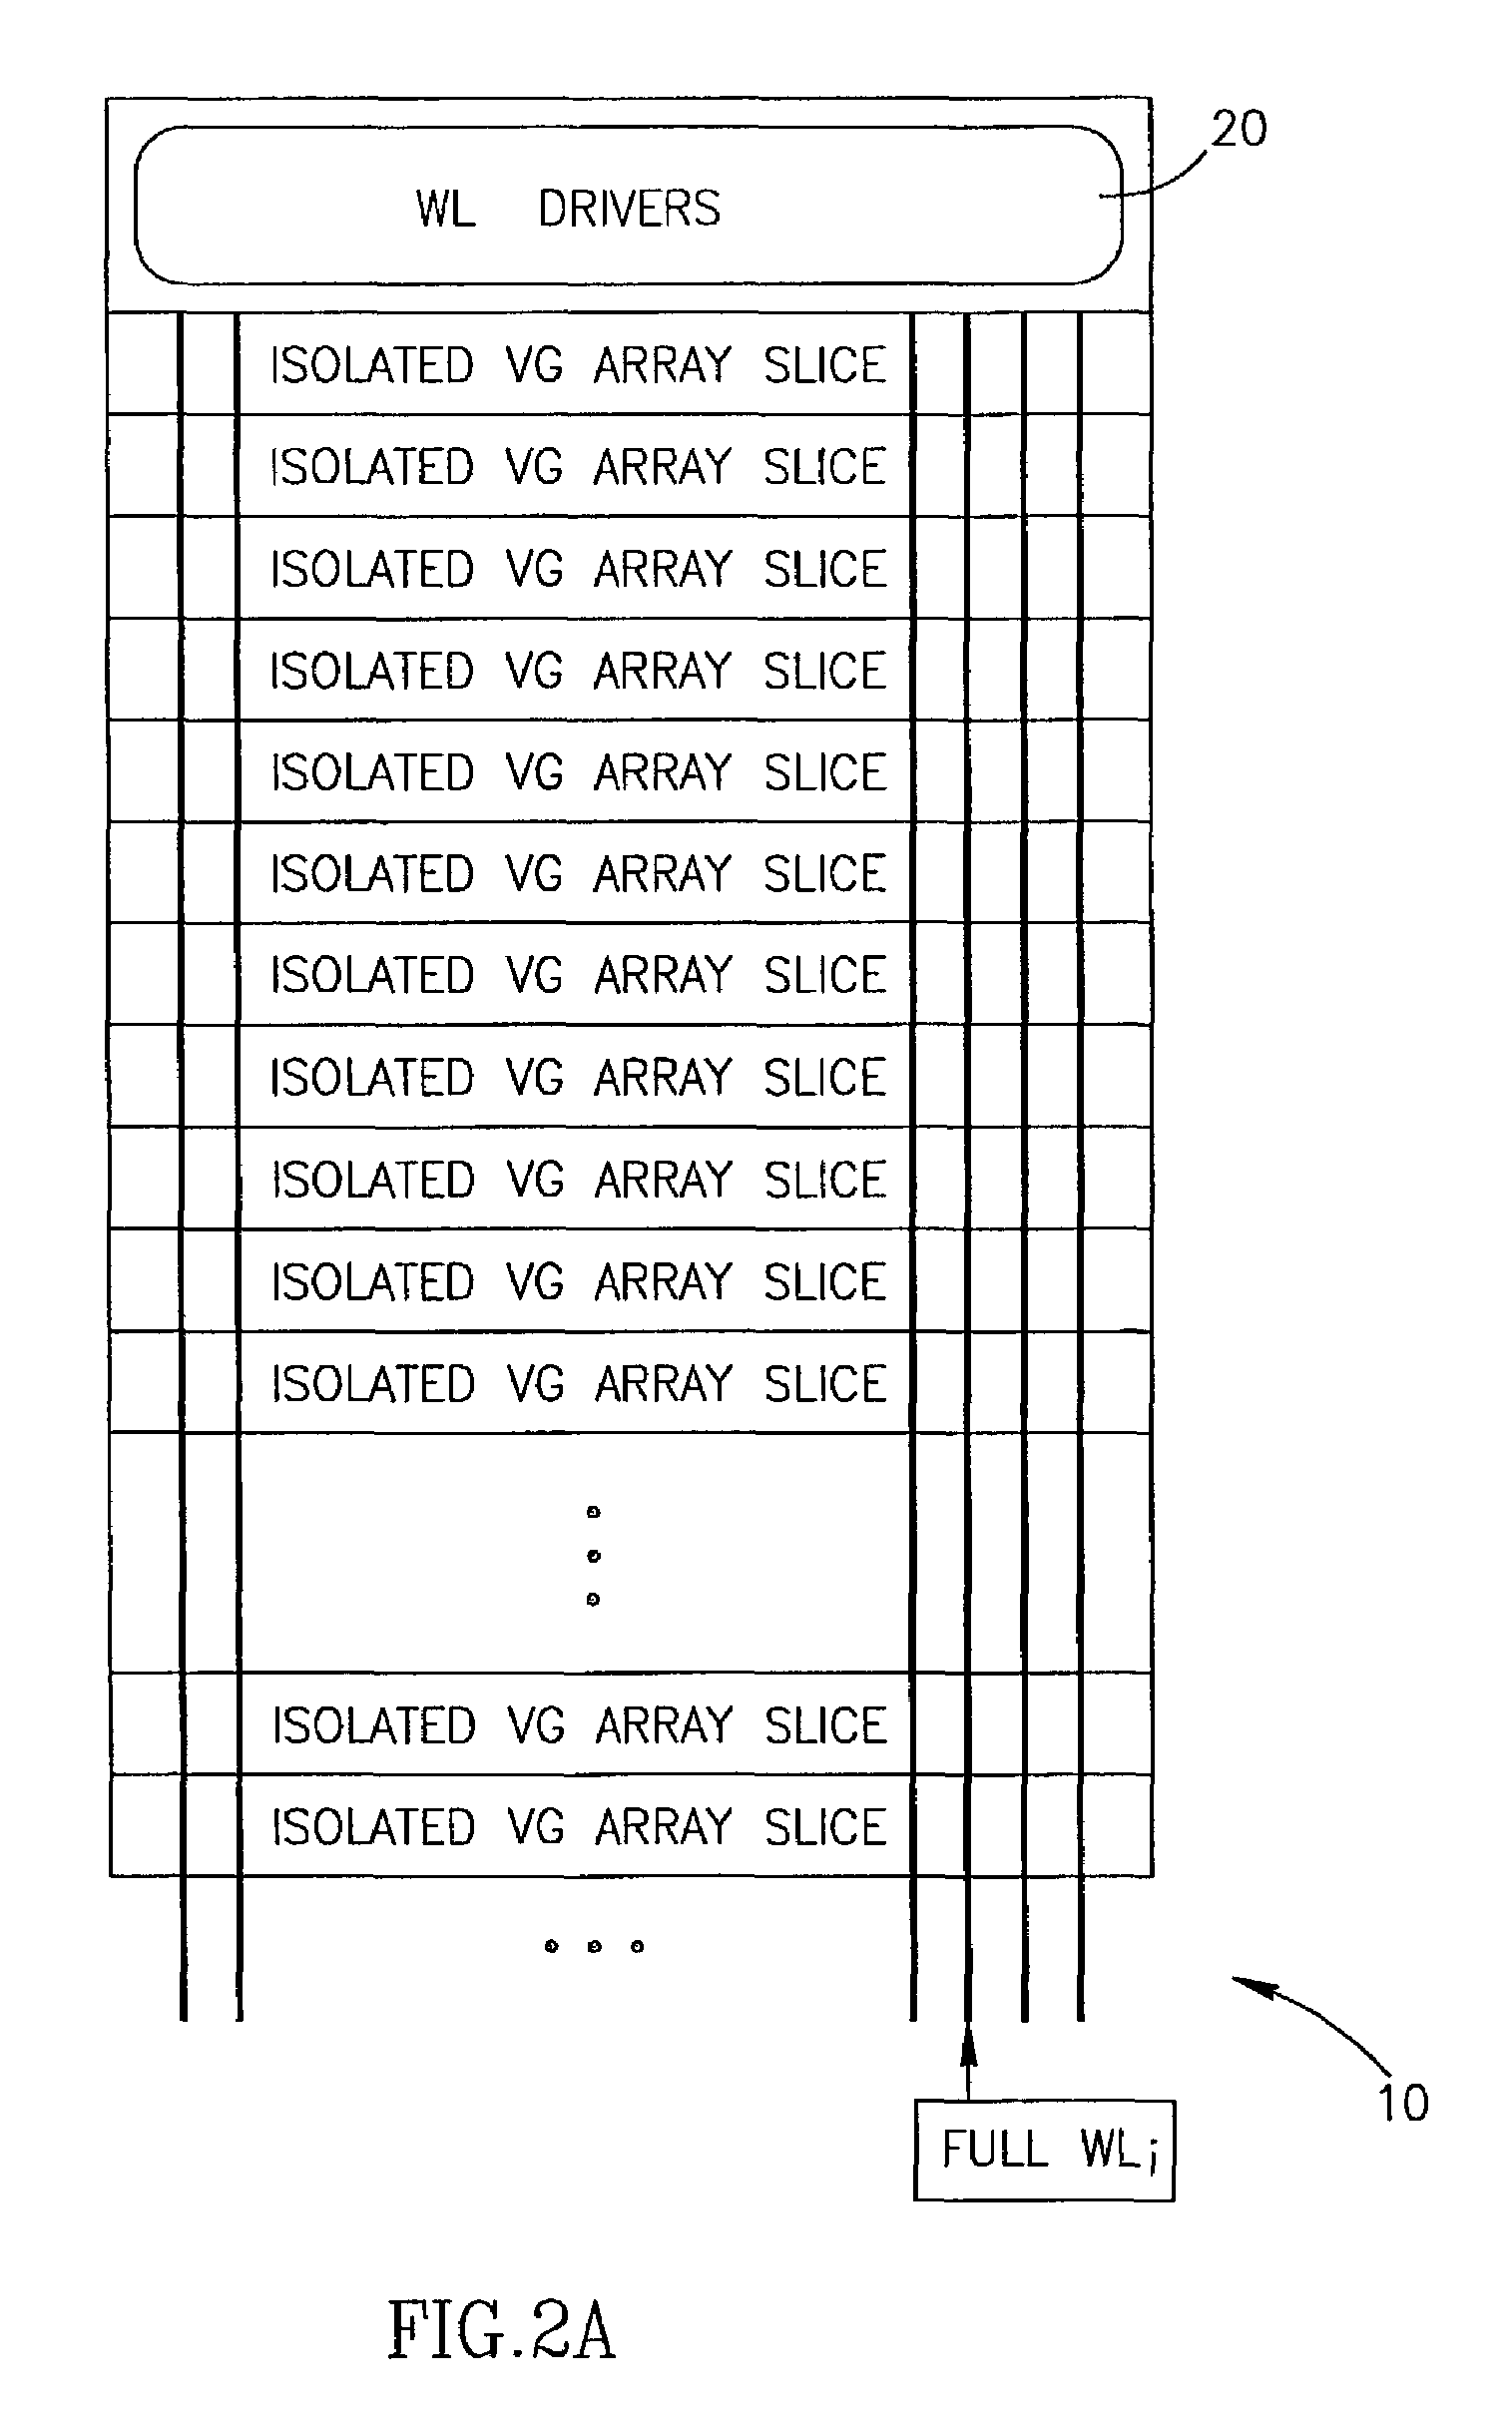 Mass storage array and methods for operation thereof